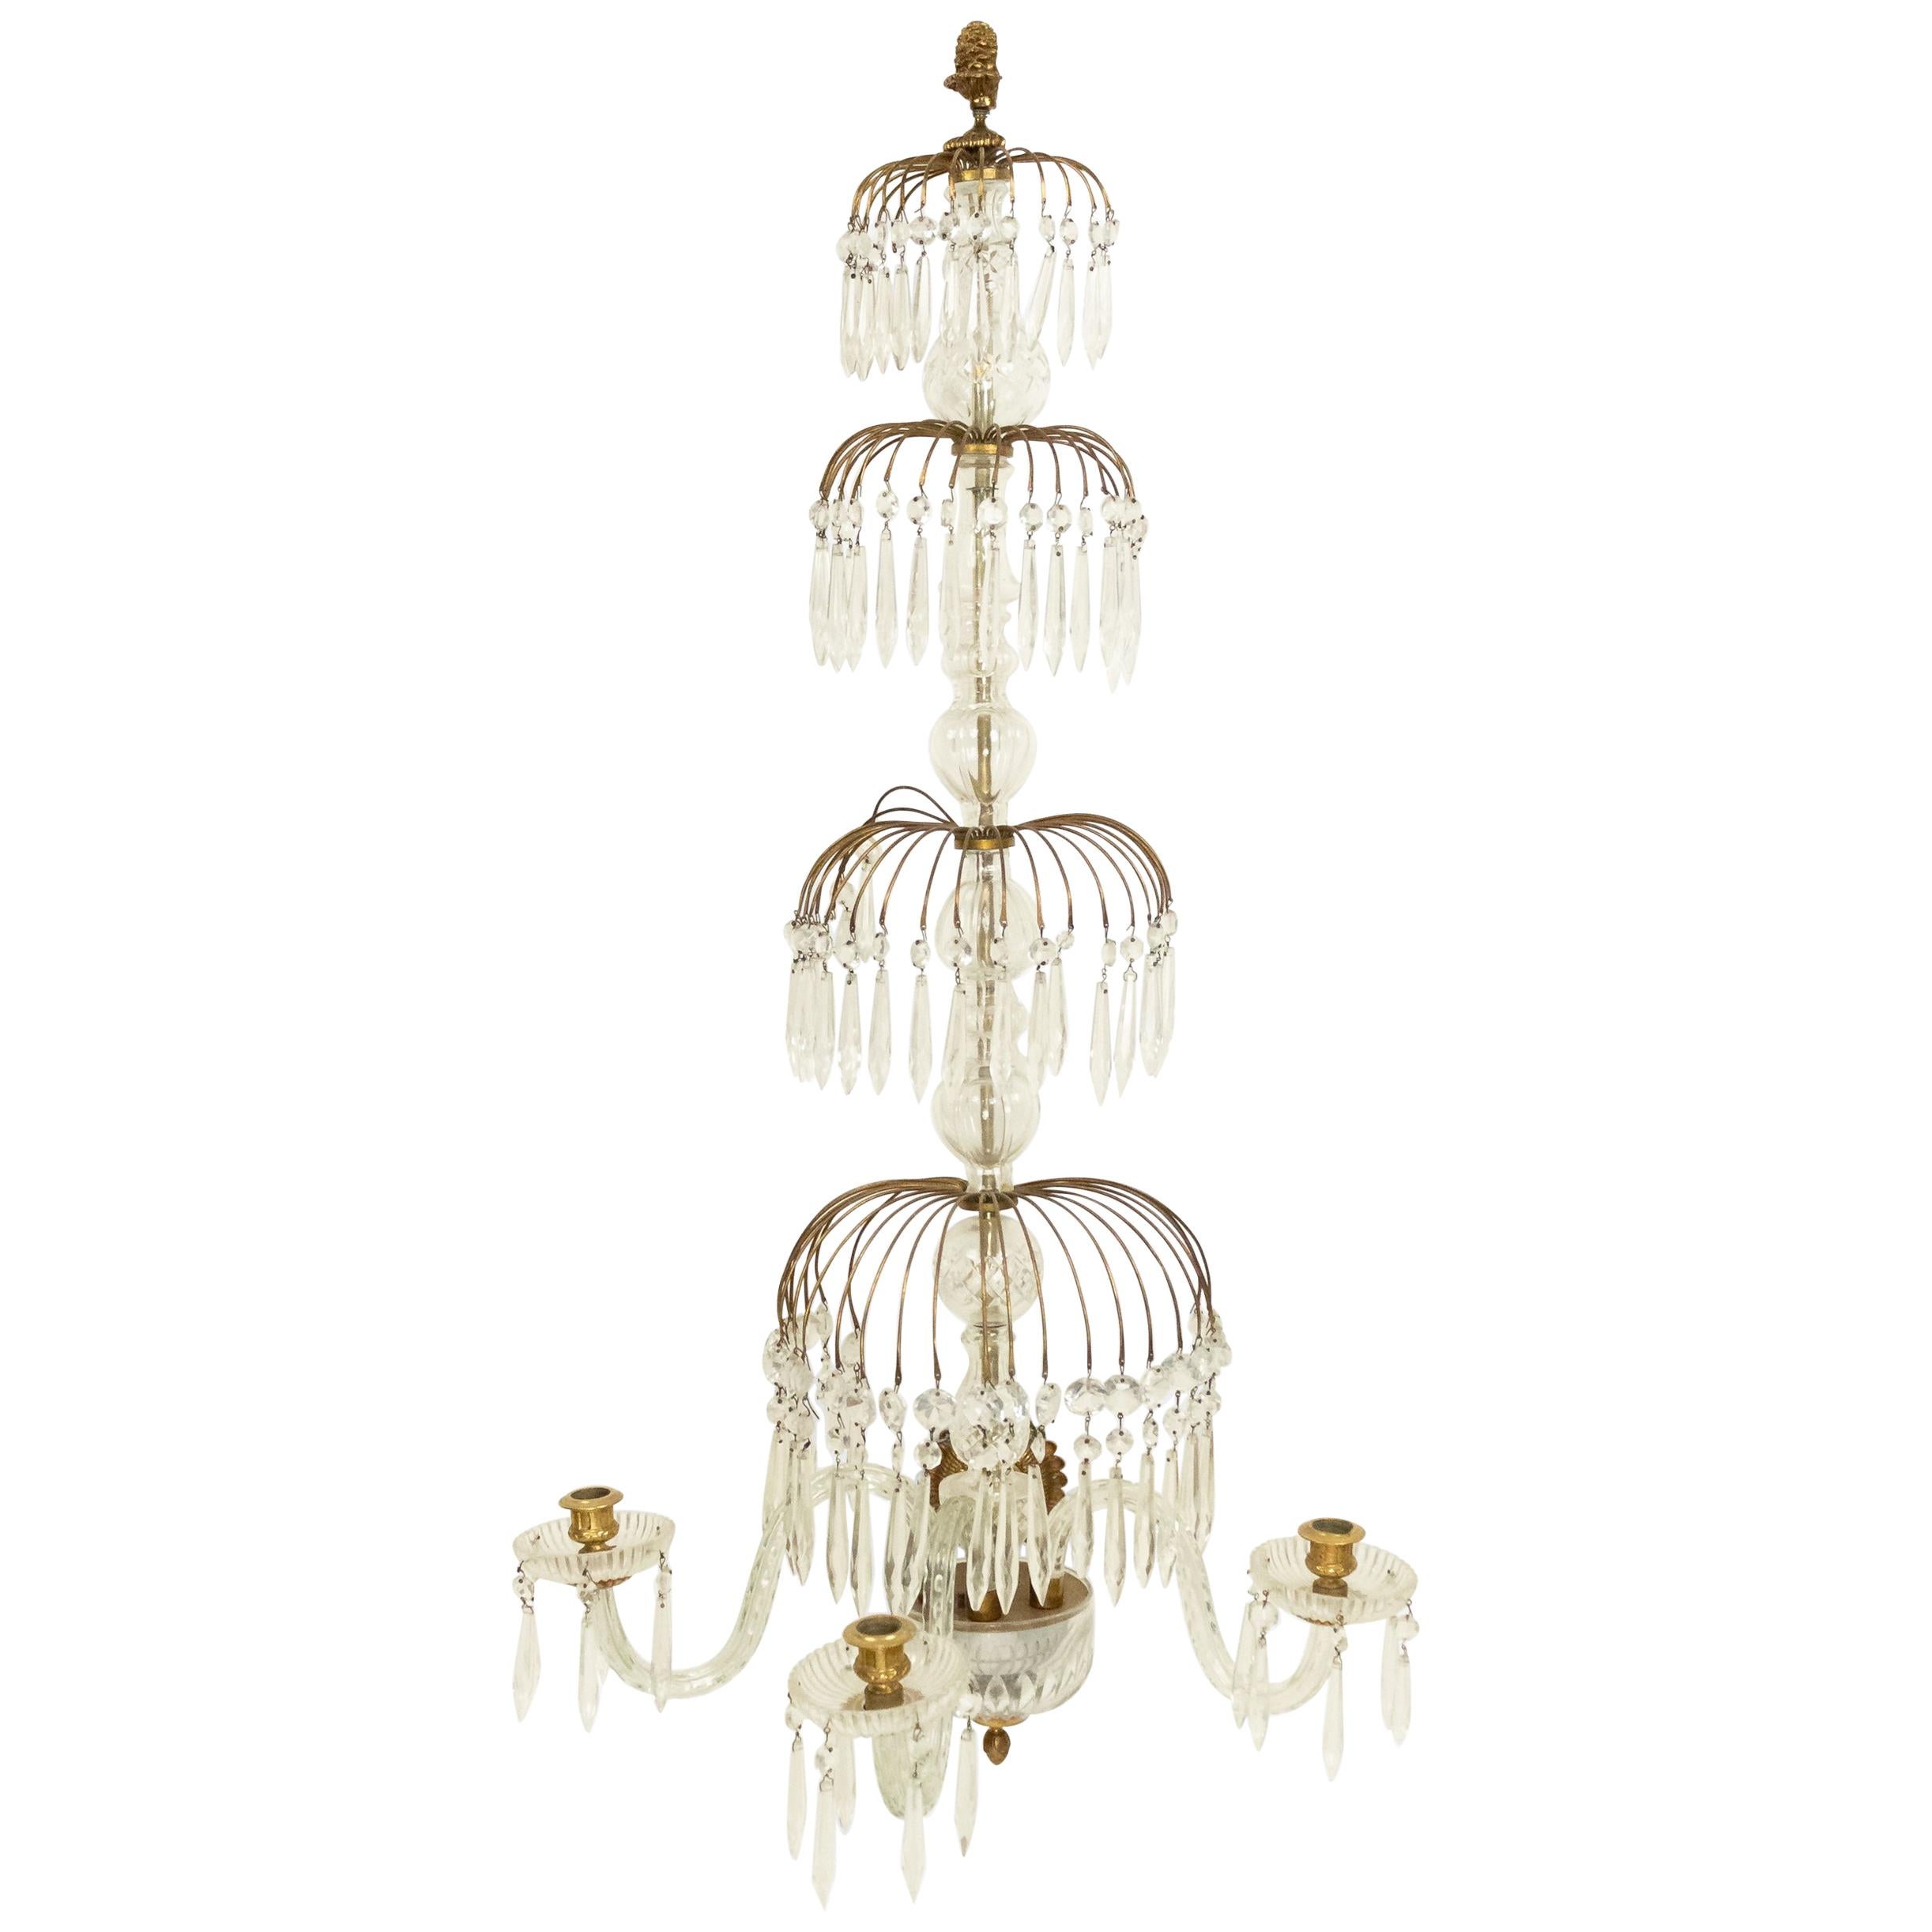 English Regency Style Crystal Wall Sconce